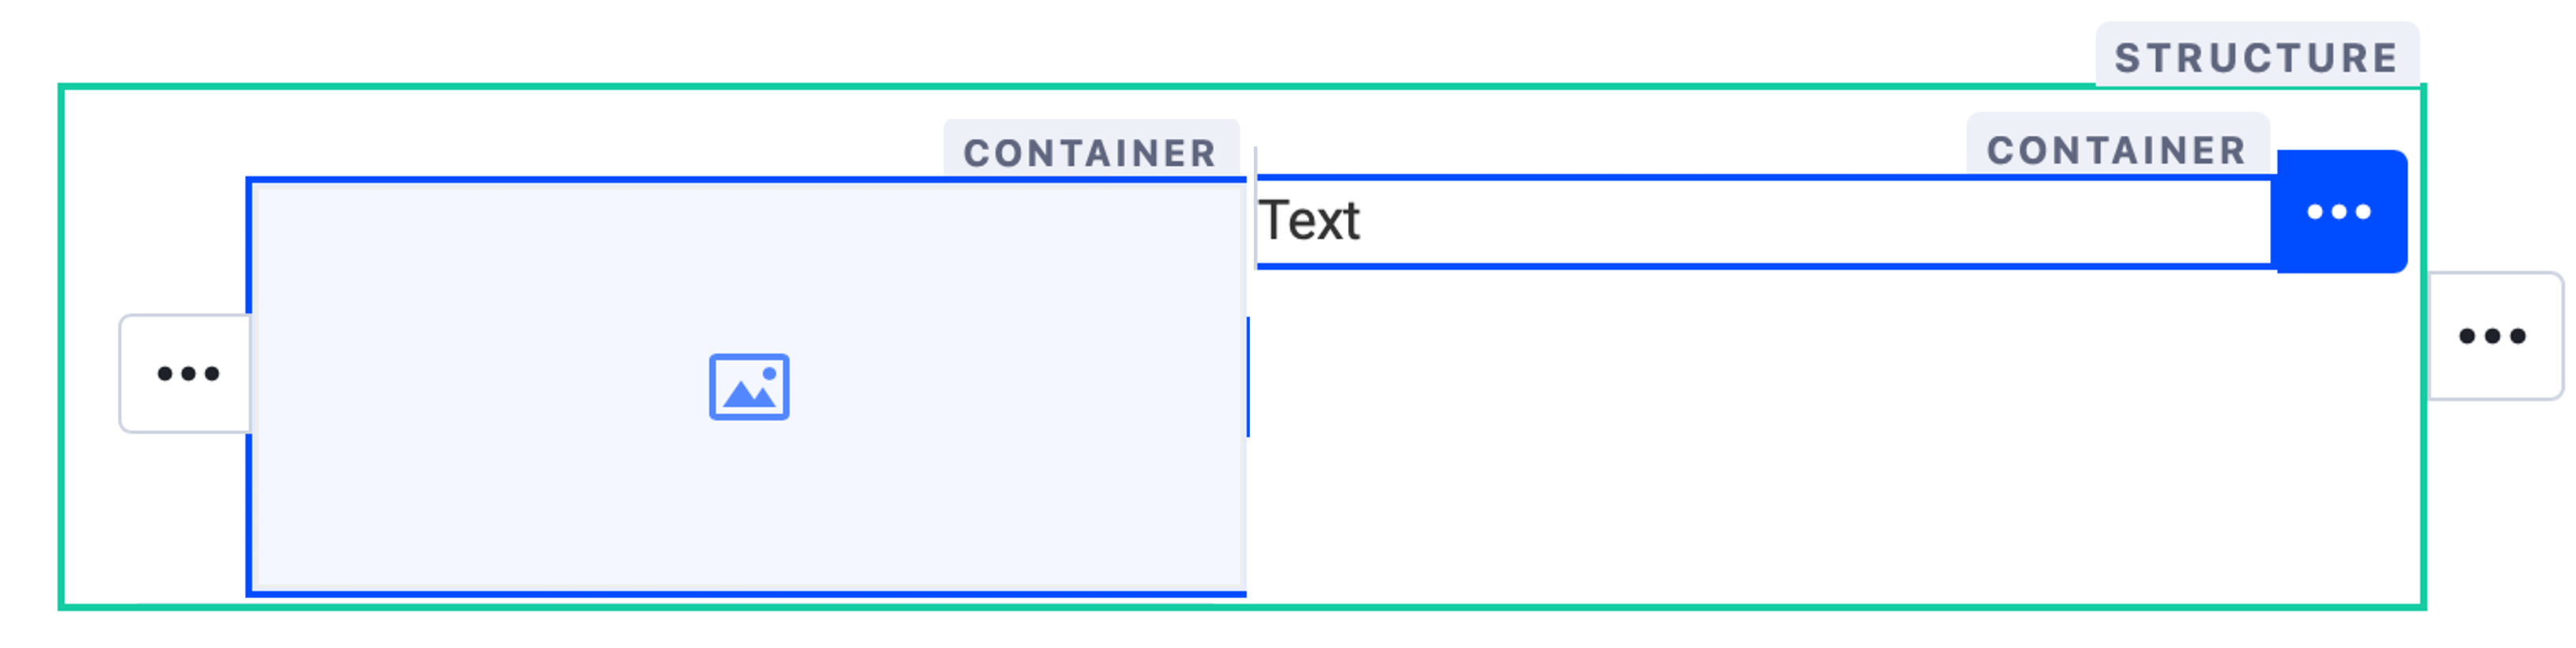 structure-two-container.png